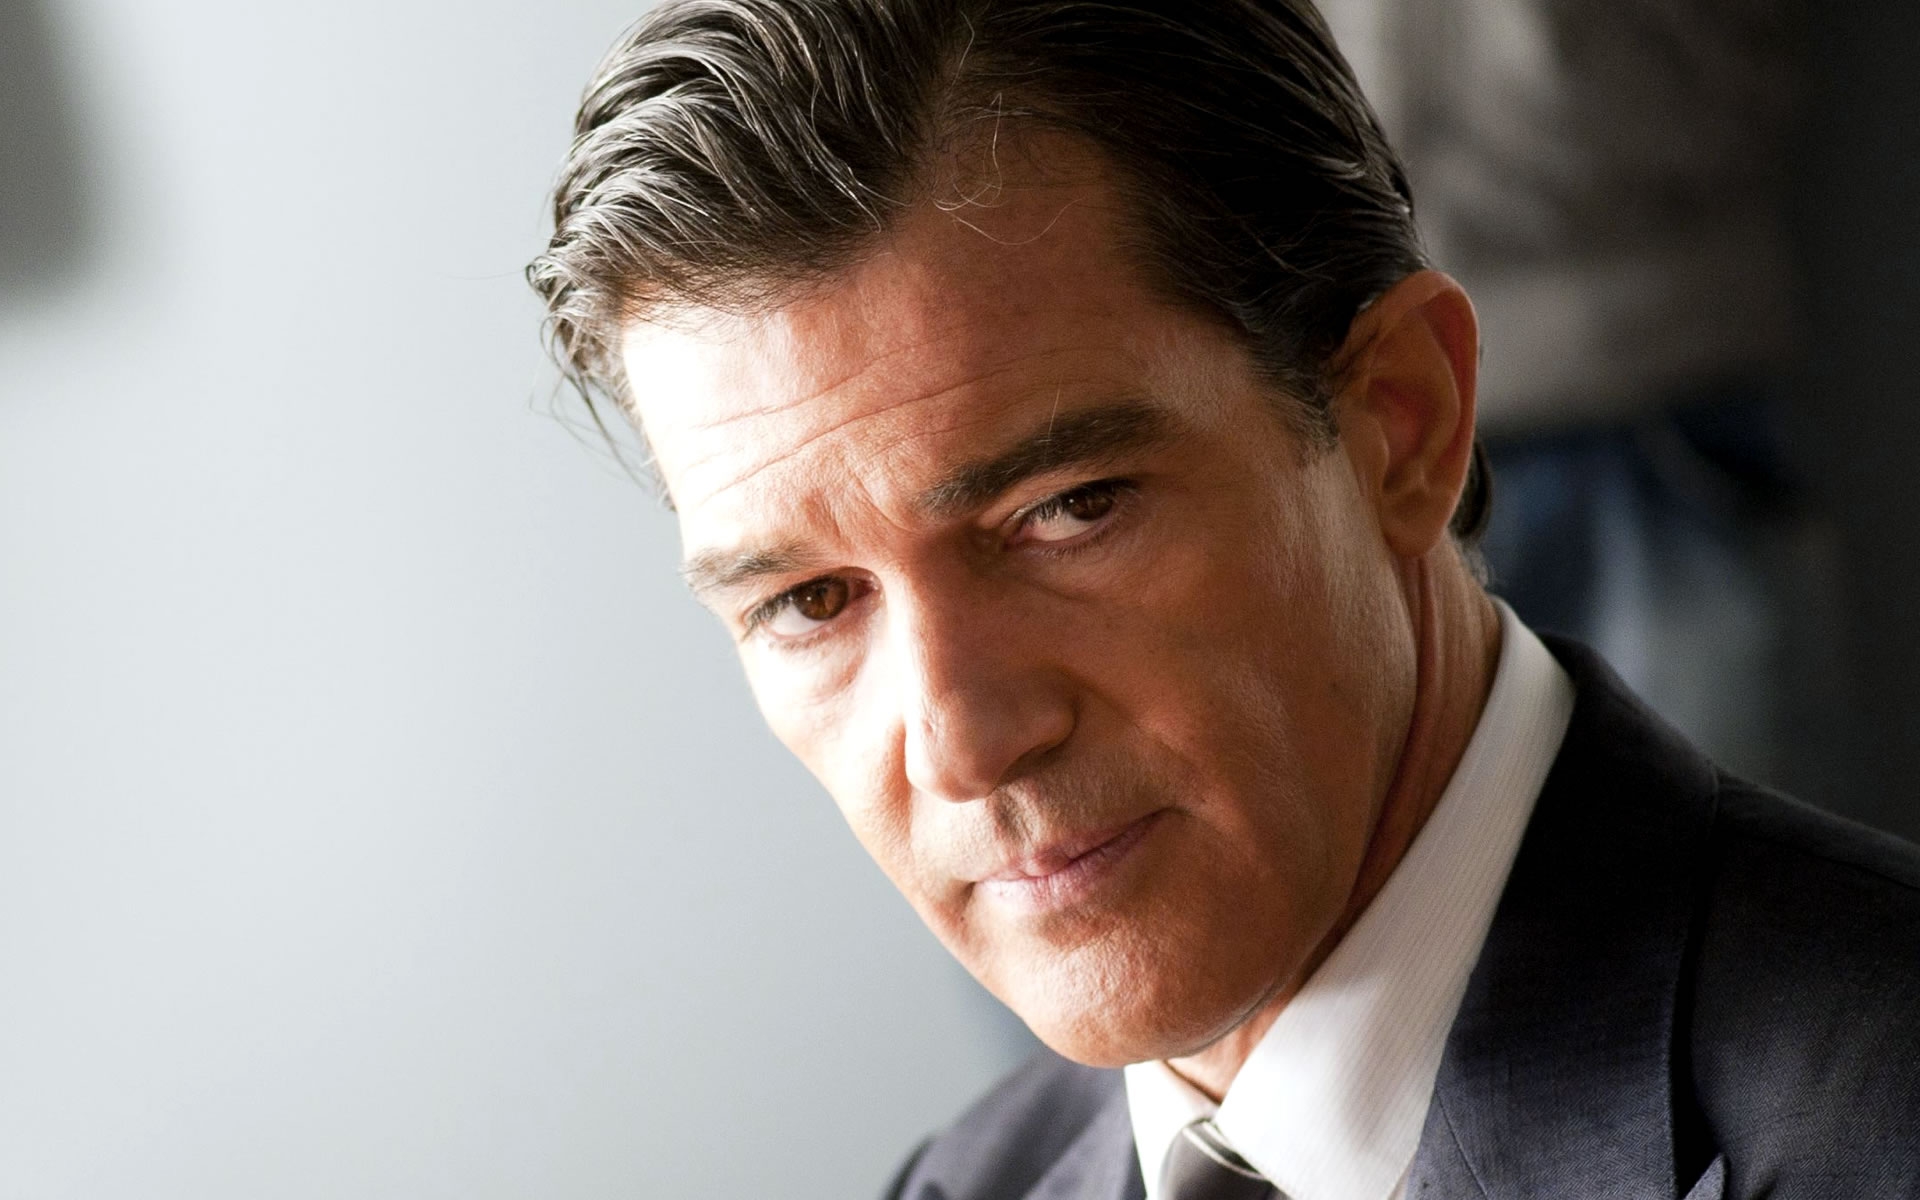 Coming off his best year in, realistically speaking, about a decade, Antonio Banderas is starting off the next one with some promise.